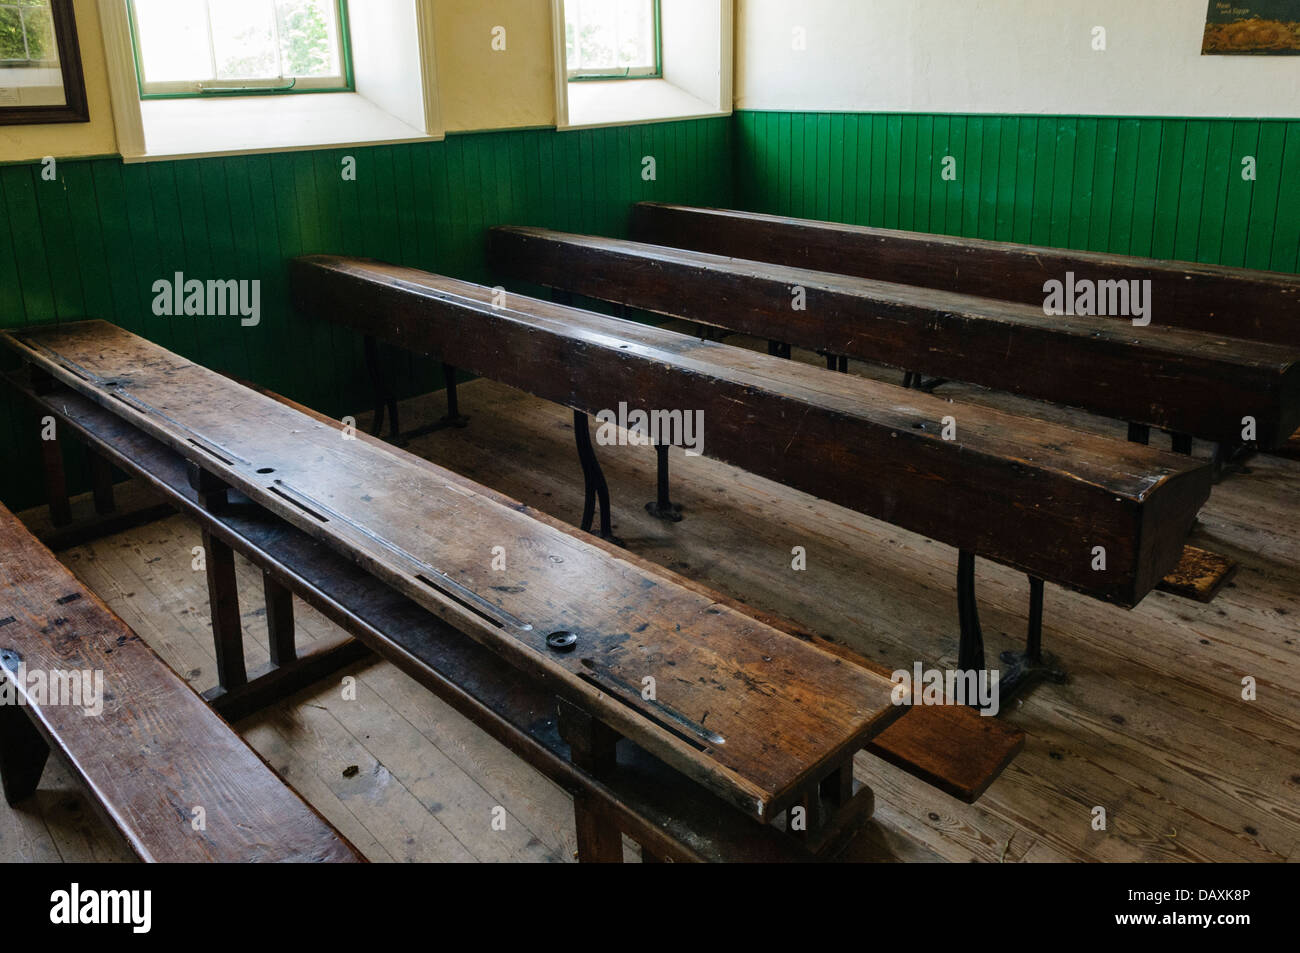 Benches in an old fashioned schoolroom Stock Photo